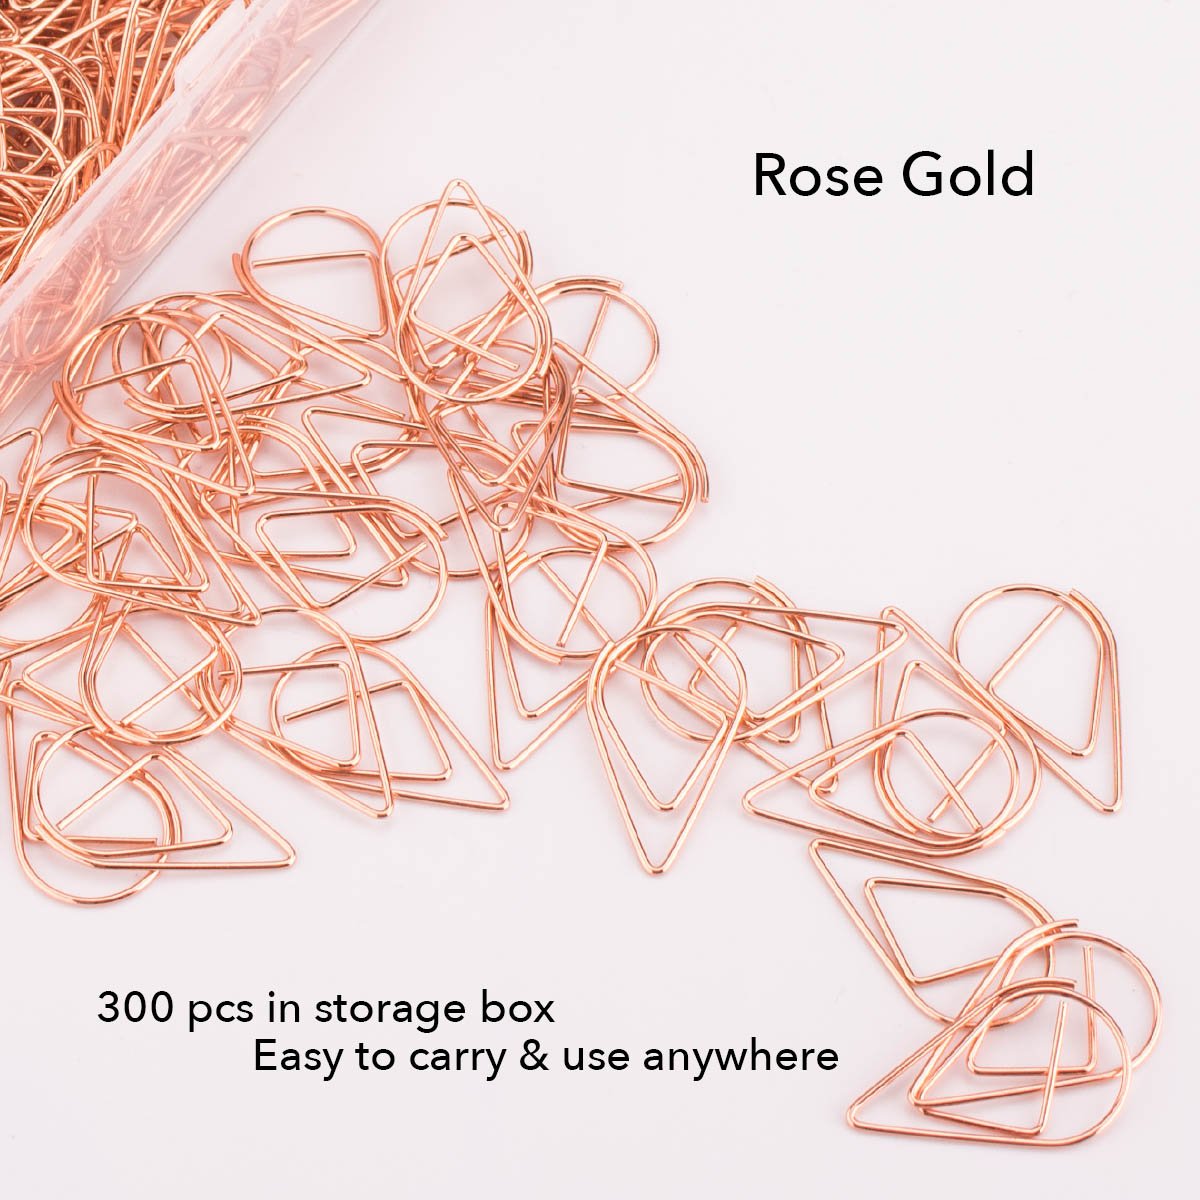 VENCINK 300 Pieces Smooth Stainless Steel Drop-Shaped Wire Small Paperclips for Office Supplies Wedding Women Girls Kids Students Paper Document Organizing Black Cute Paper Clips 1 inch